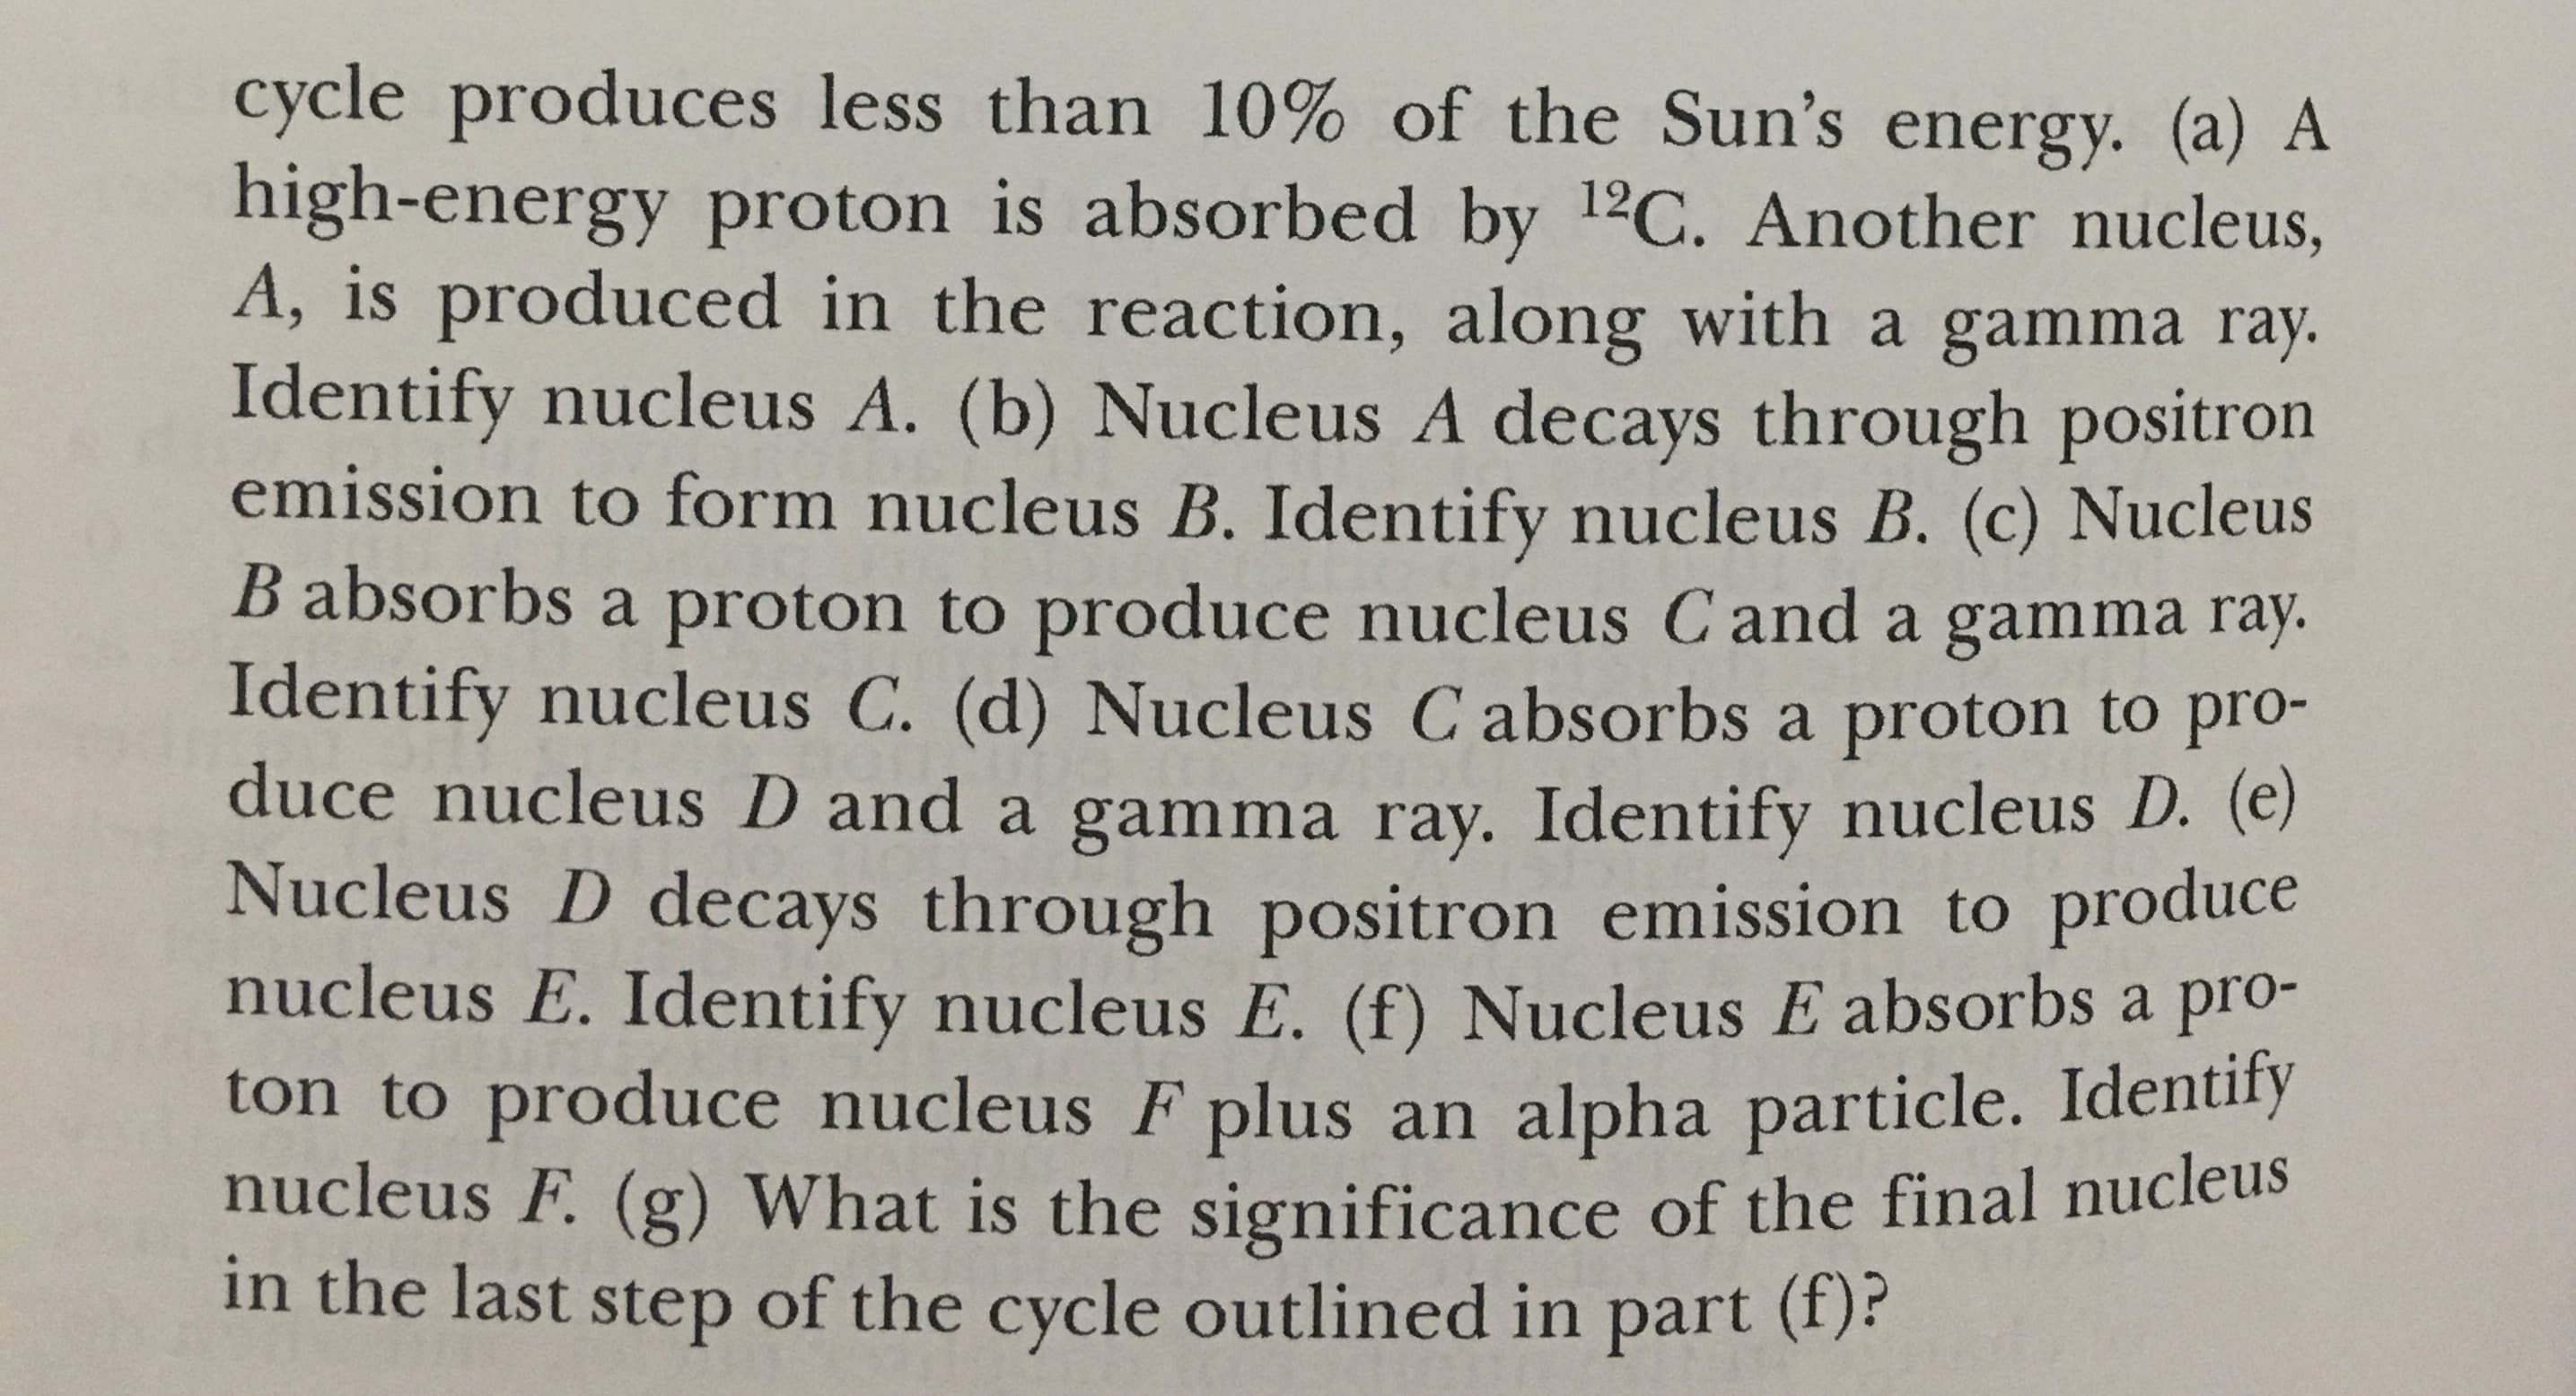 cycle produces less than 10% of the Sun's energy. (a) A
high-energy proton is absorbed by 12C. Another nucleus,
A, is produced in the reaction, along with a gamma ray
Identify nucleus A. (b) Nucleus A decays through positron
emission to form nucleus B. Identify nucleus B. (c) Nucleus
B absorbs a proton to produce nucleus Cand a gamma ray
Identify nucleus C. (d) Nucleus C absorbs a proton to pro-
duce nucleus D and a gamma ray. Identify nucleus D. (e)
Nucleus D decays through positron emission to produce
nucleus E. Identify nucleus E. (f) Nucleus E absorbs a pro-
ton to produce nucleus F plus an alpha particle. Identiry
nucleus F. (g) What is the significance of the final nucleus
in the last step of the cycle outlined in part (f)
